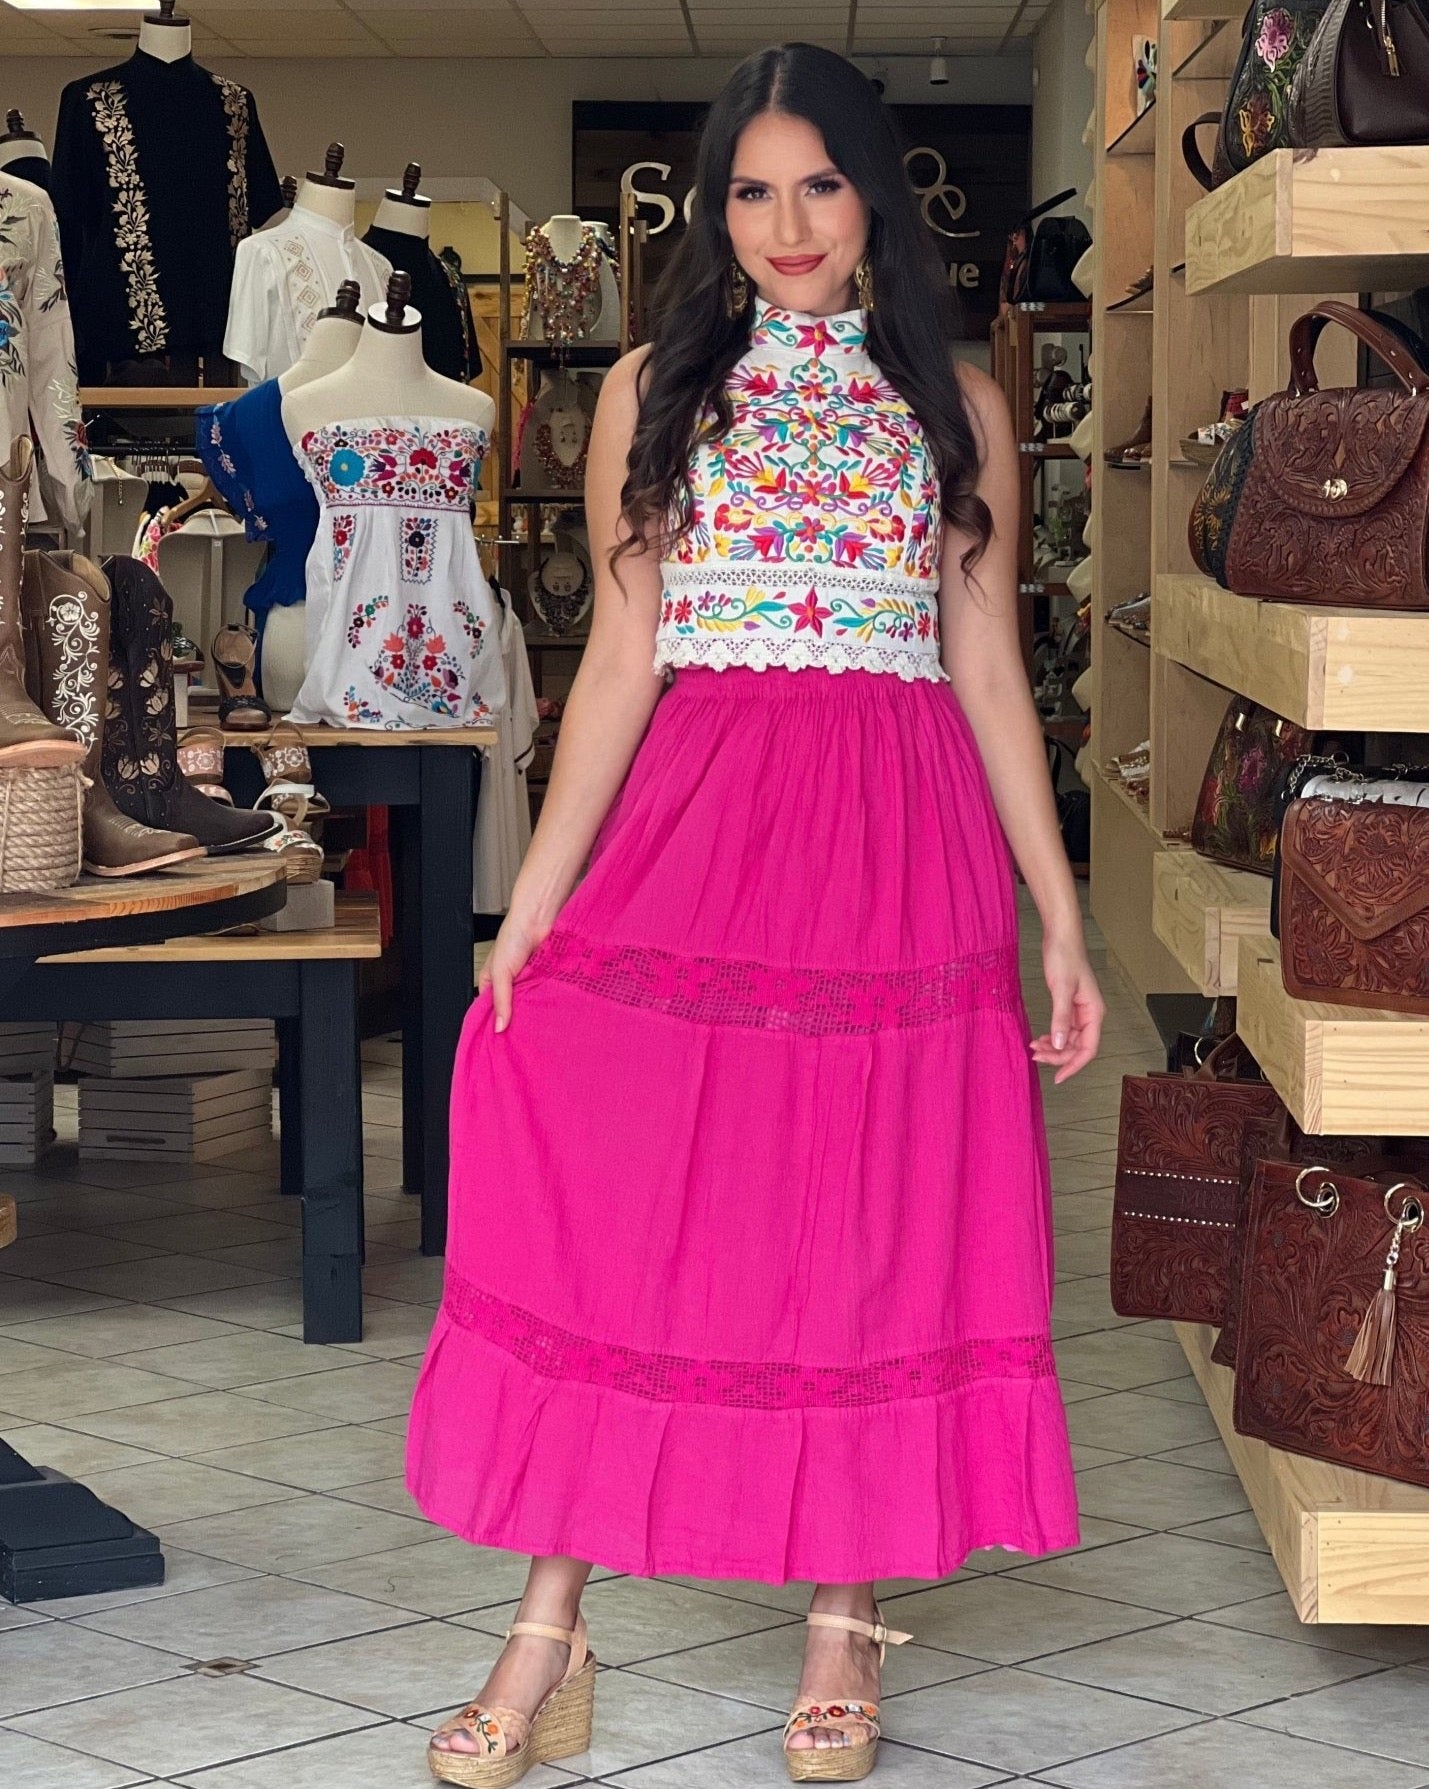 Colorful Mexican Skirt. Camila Skirt. - Solei Store